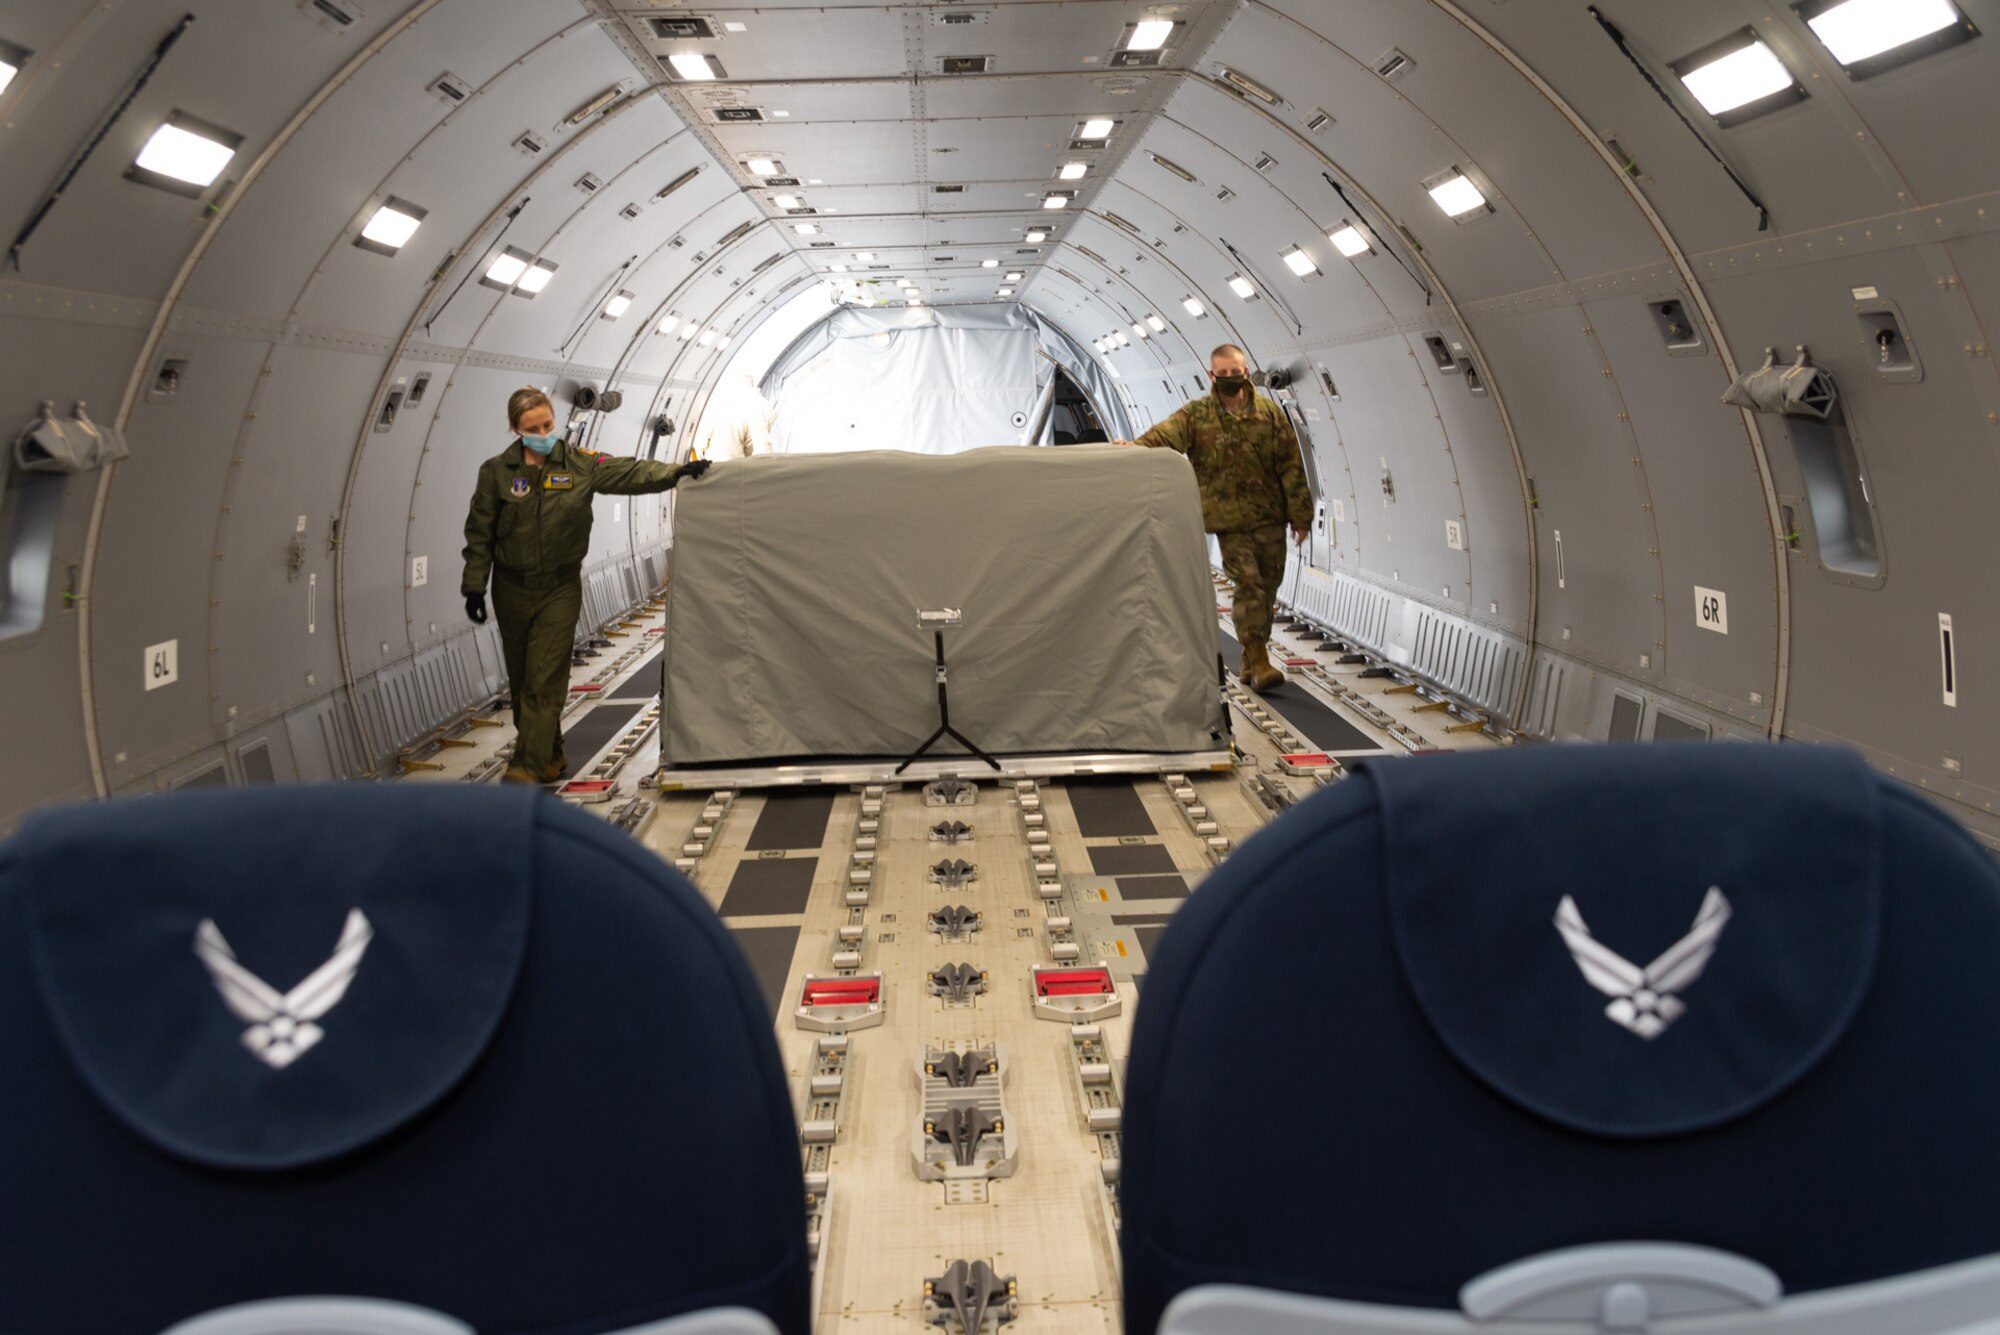 U.S. Air Force Tech. Sgt. Natalie Belongie and Staff Sgt. Christopher Ager, both assigned to the 157th Air Refueling Wing, New Hampshire Air National Guard, load seat pallets in a KC-46A, Pease Air National Guard Base, New Hampshire, Jan. 14, 2021. The tanker is one of Pease’s three jets being used to transport about 500 National Guardsmen from New Hampshire, Oklahoma and Nevada to Washington D.C. to provide security during Inauguration Day Jan. 20. (U.S. Air Force photo by Tech. Sgt. Aaron Vezeau)